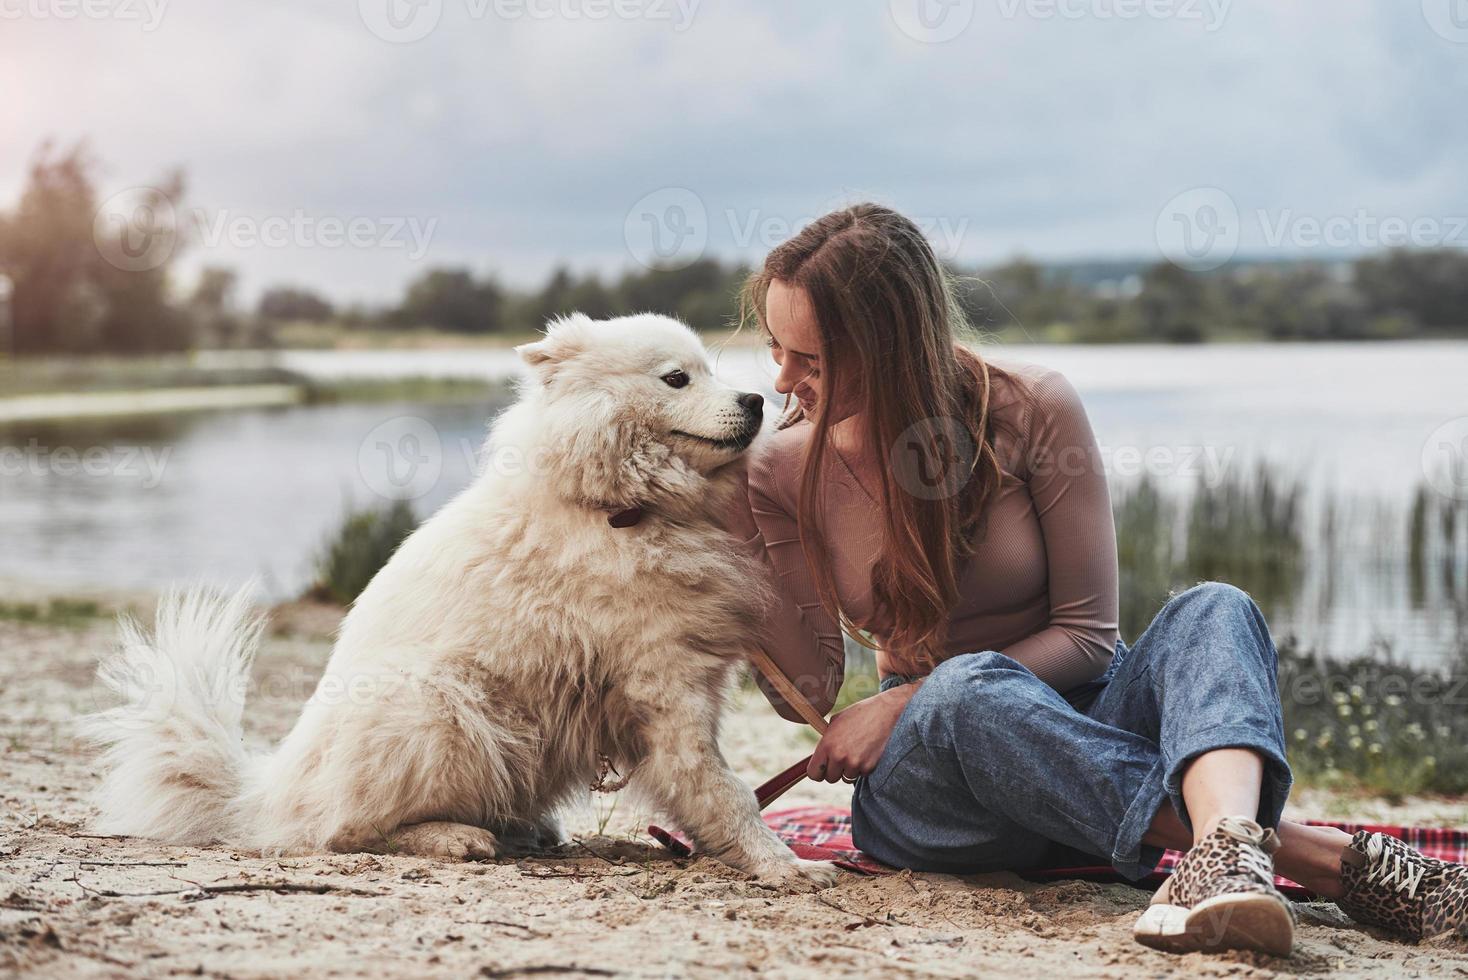 Good walk. Blonde girl with her cute white dog have a great time spending on a beach photo